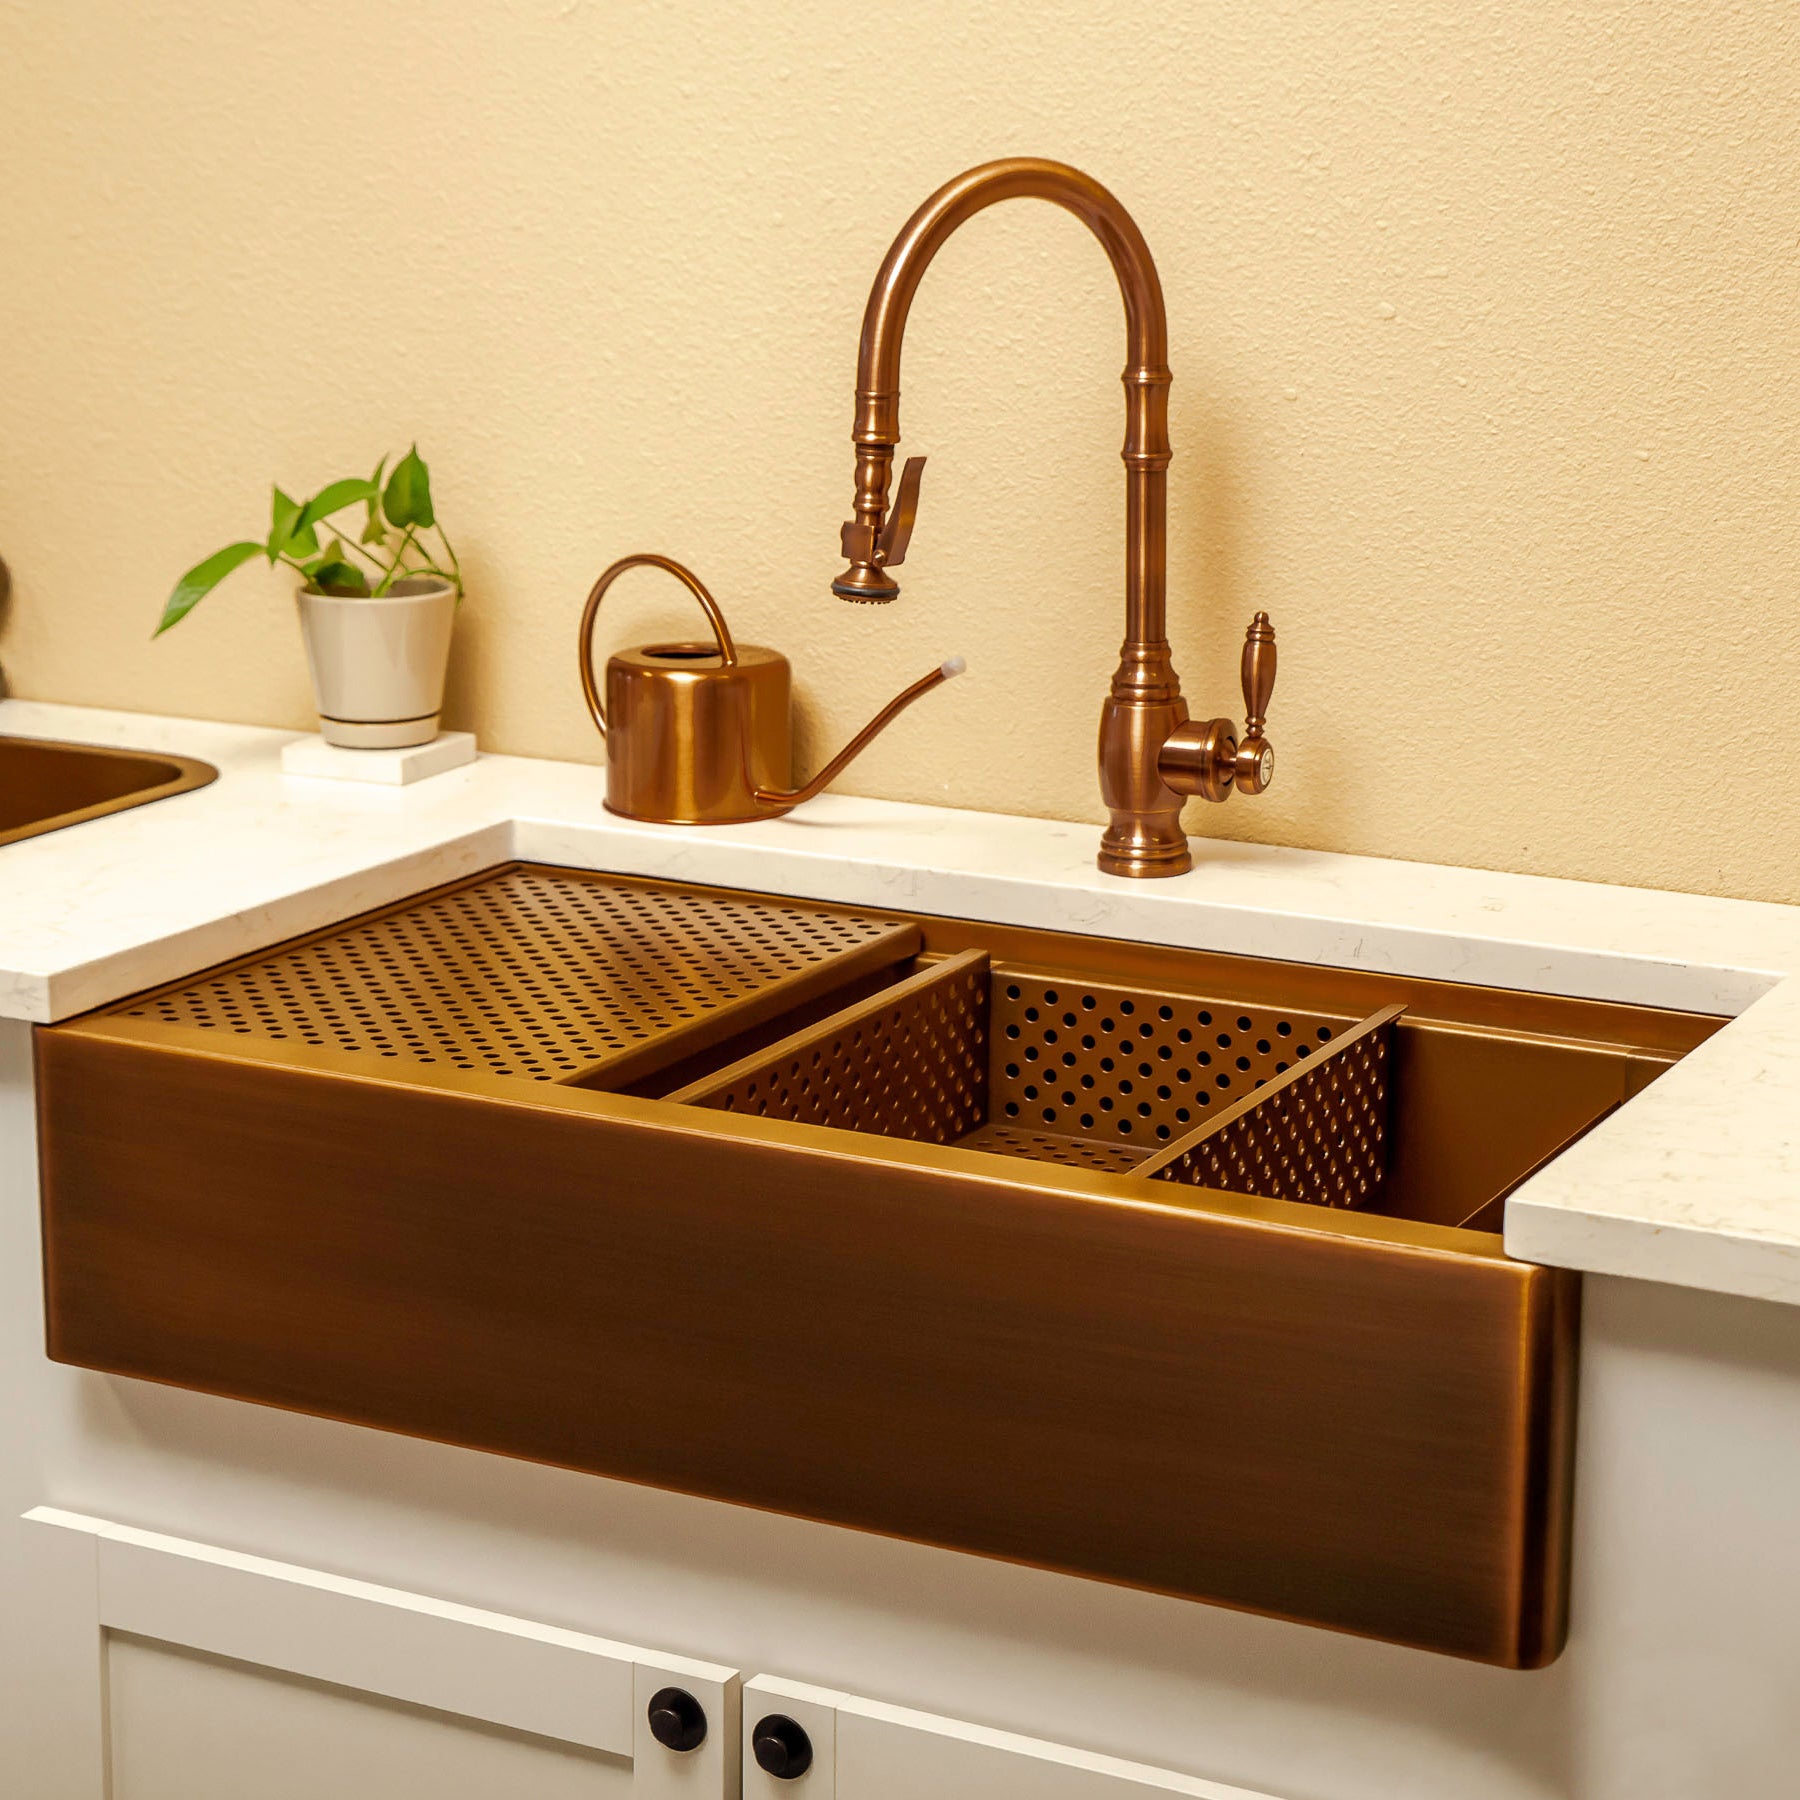 Handcrafted Pure Copper Kitchen Sinks